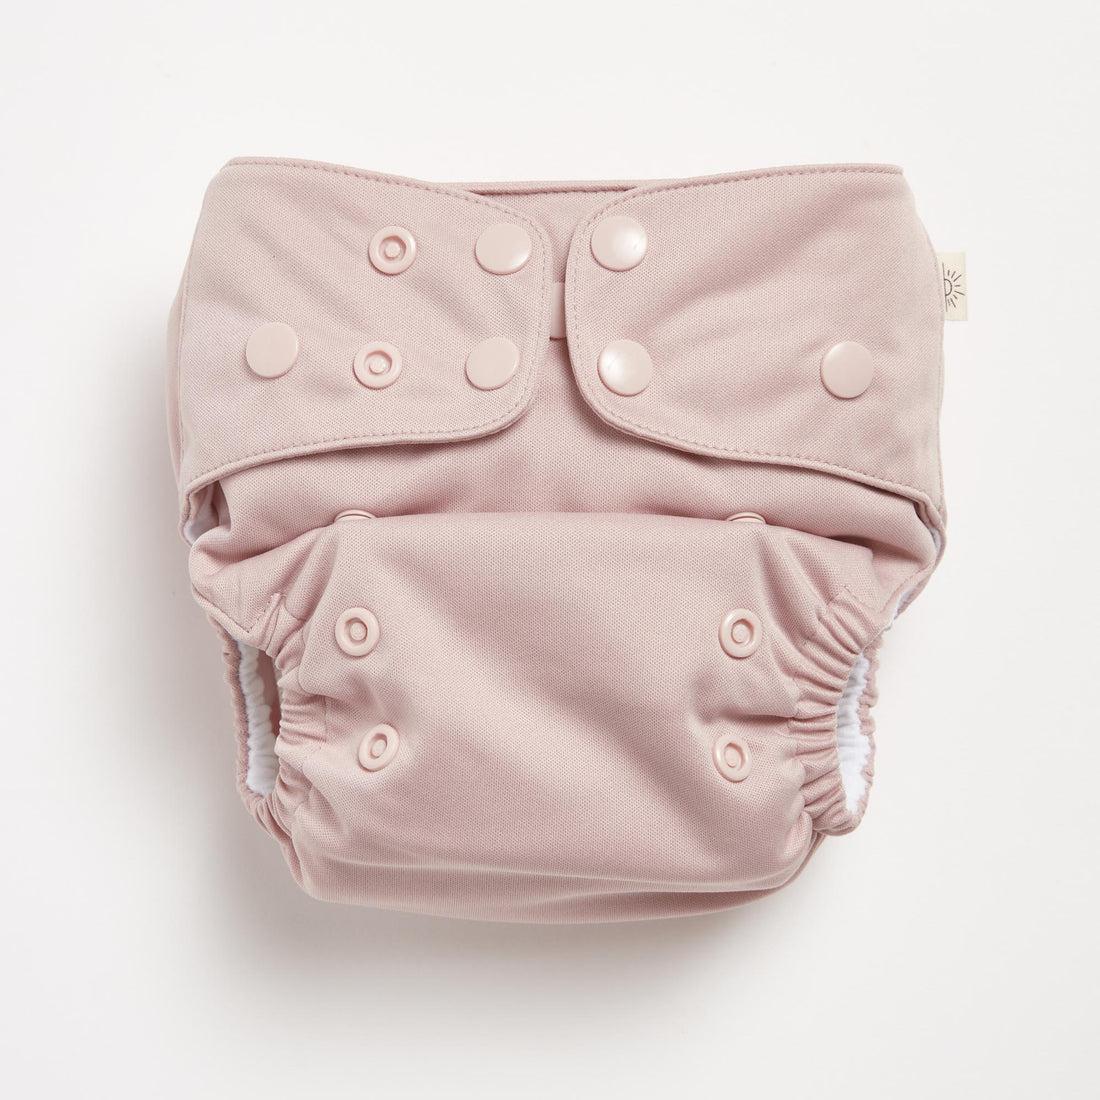 EcoNaps All in Two Pocket Nappy Dusty Rose-All in Two Nappy-EcoNaps-The Nappy Market